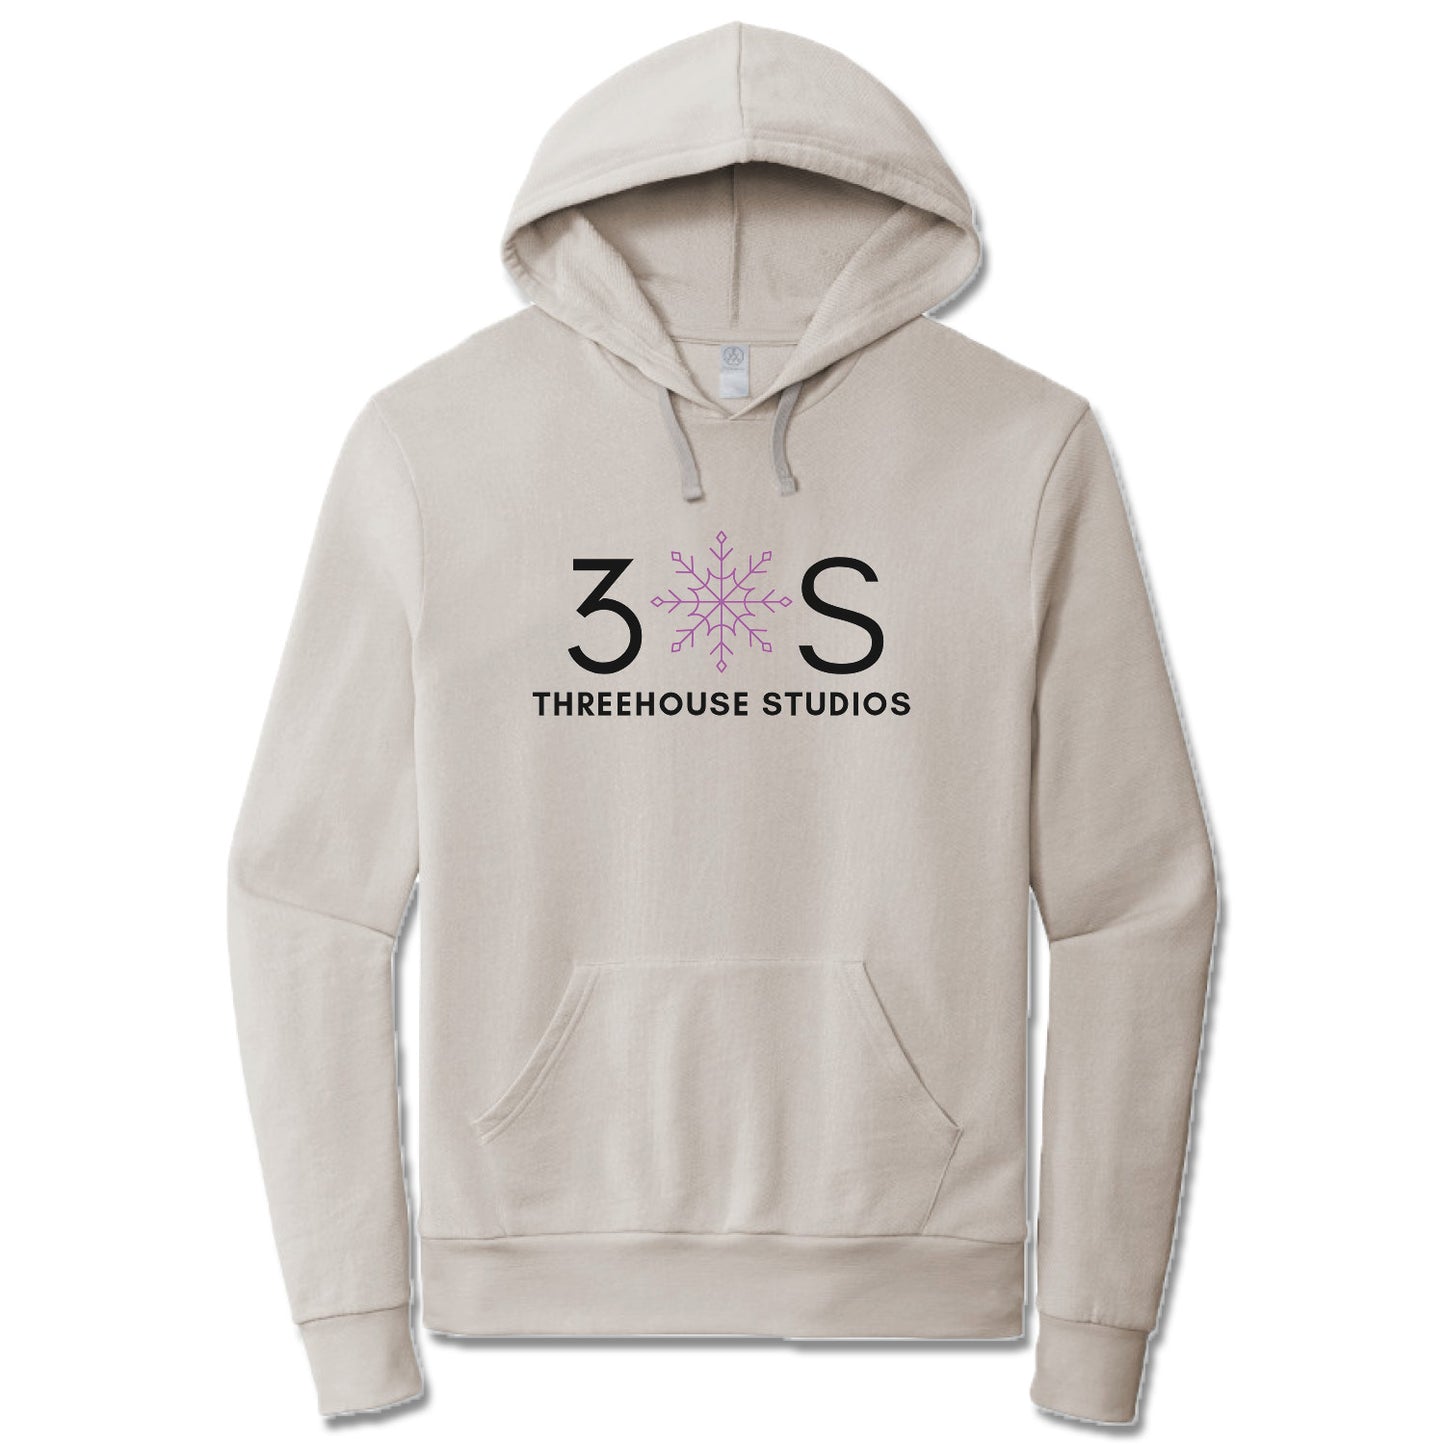 THREEHOUSE STUDIOS | LIGHT GRAY FRENCH TERRY HOODIE | 3S Snowflake